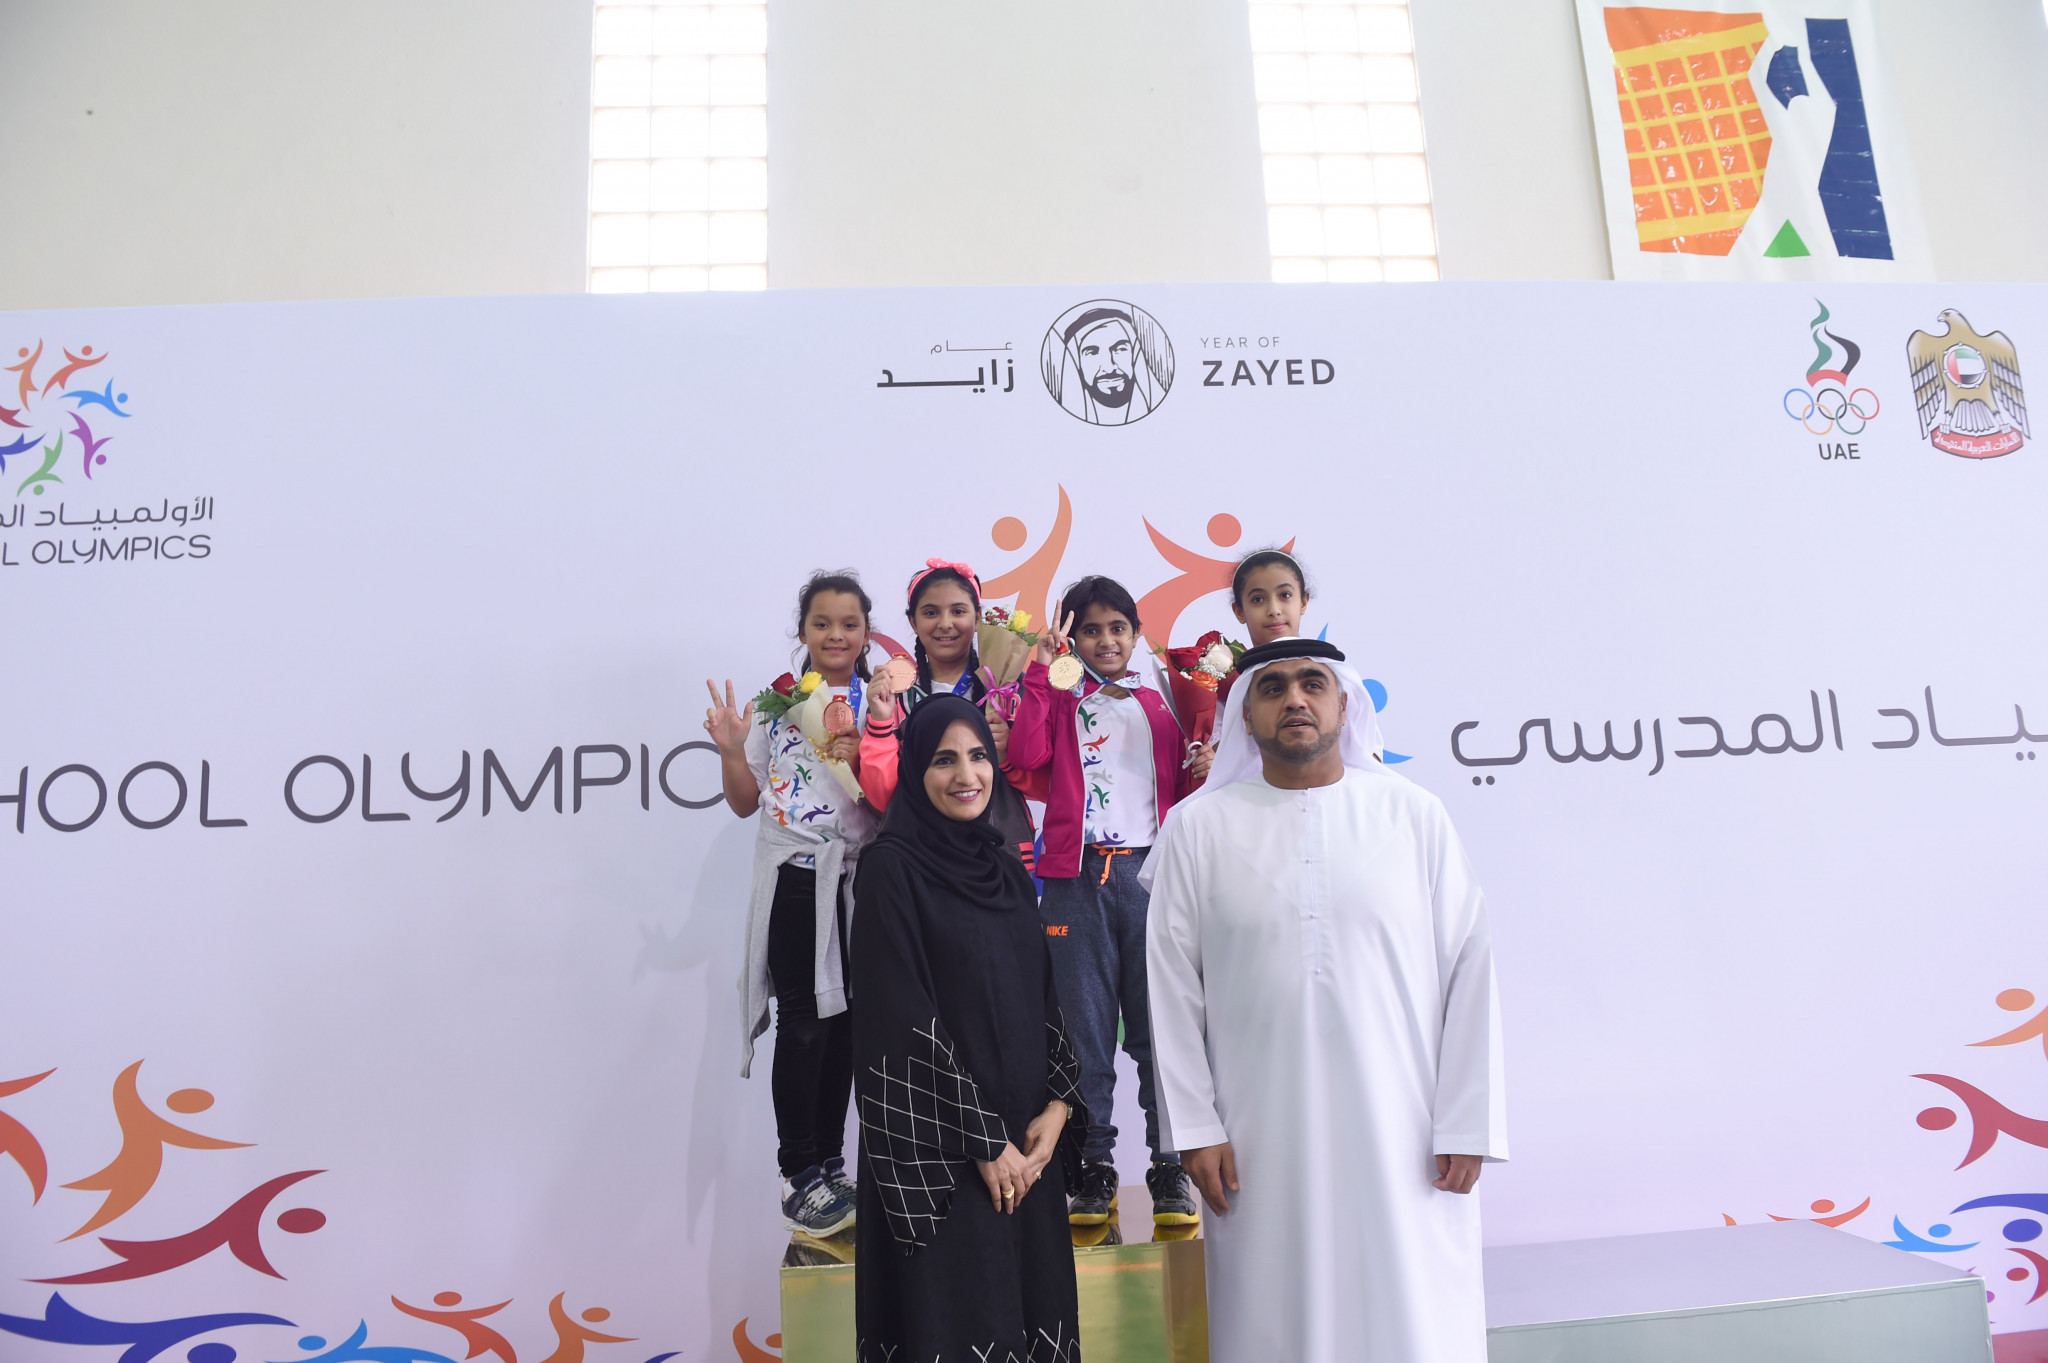 United Arab Emirates National Olympic Committee School Games receives boost after more girls allowed to compete